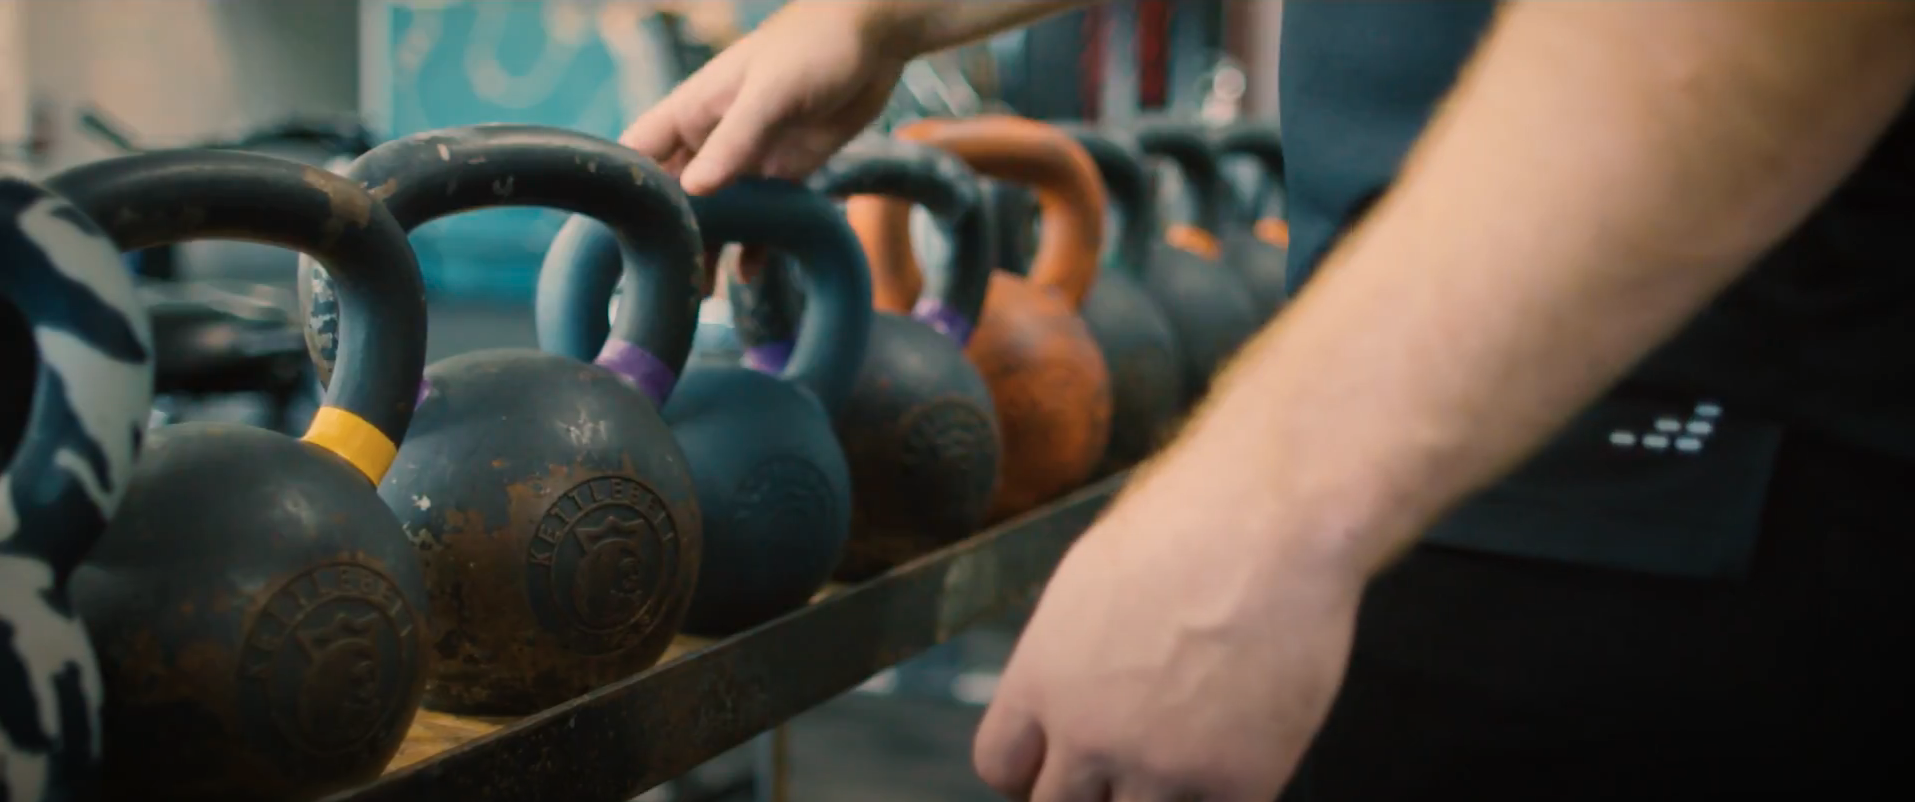 person reaching for kettlebell in gym